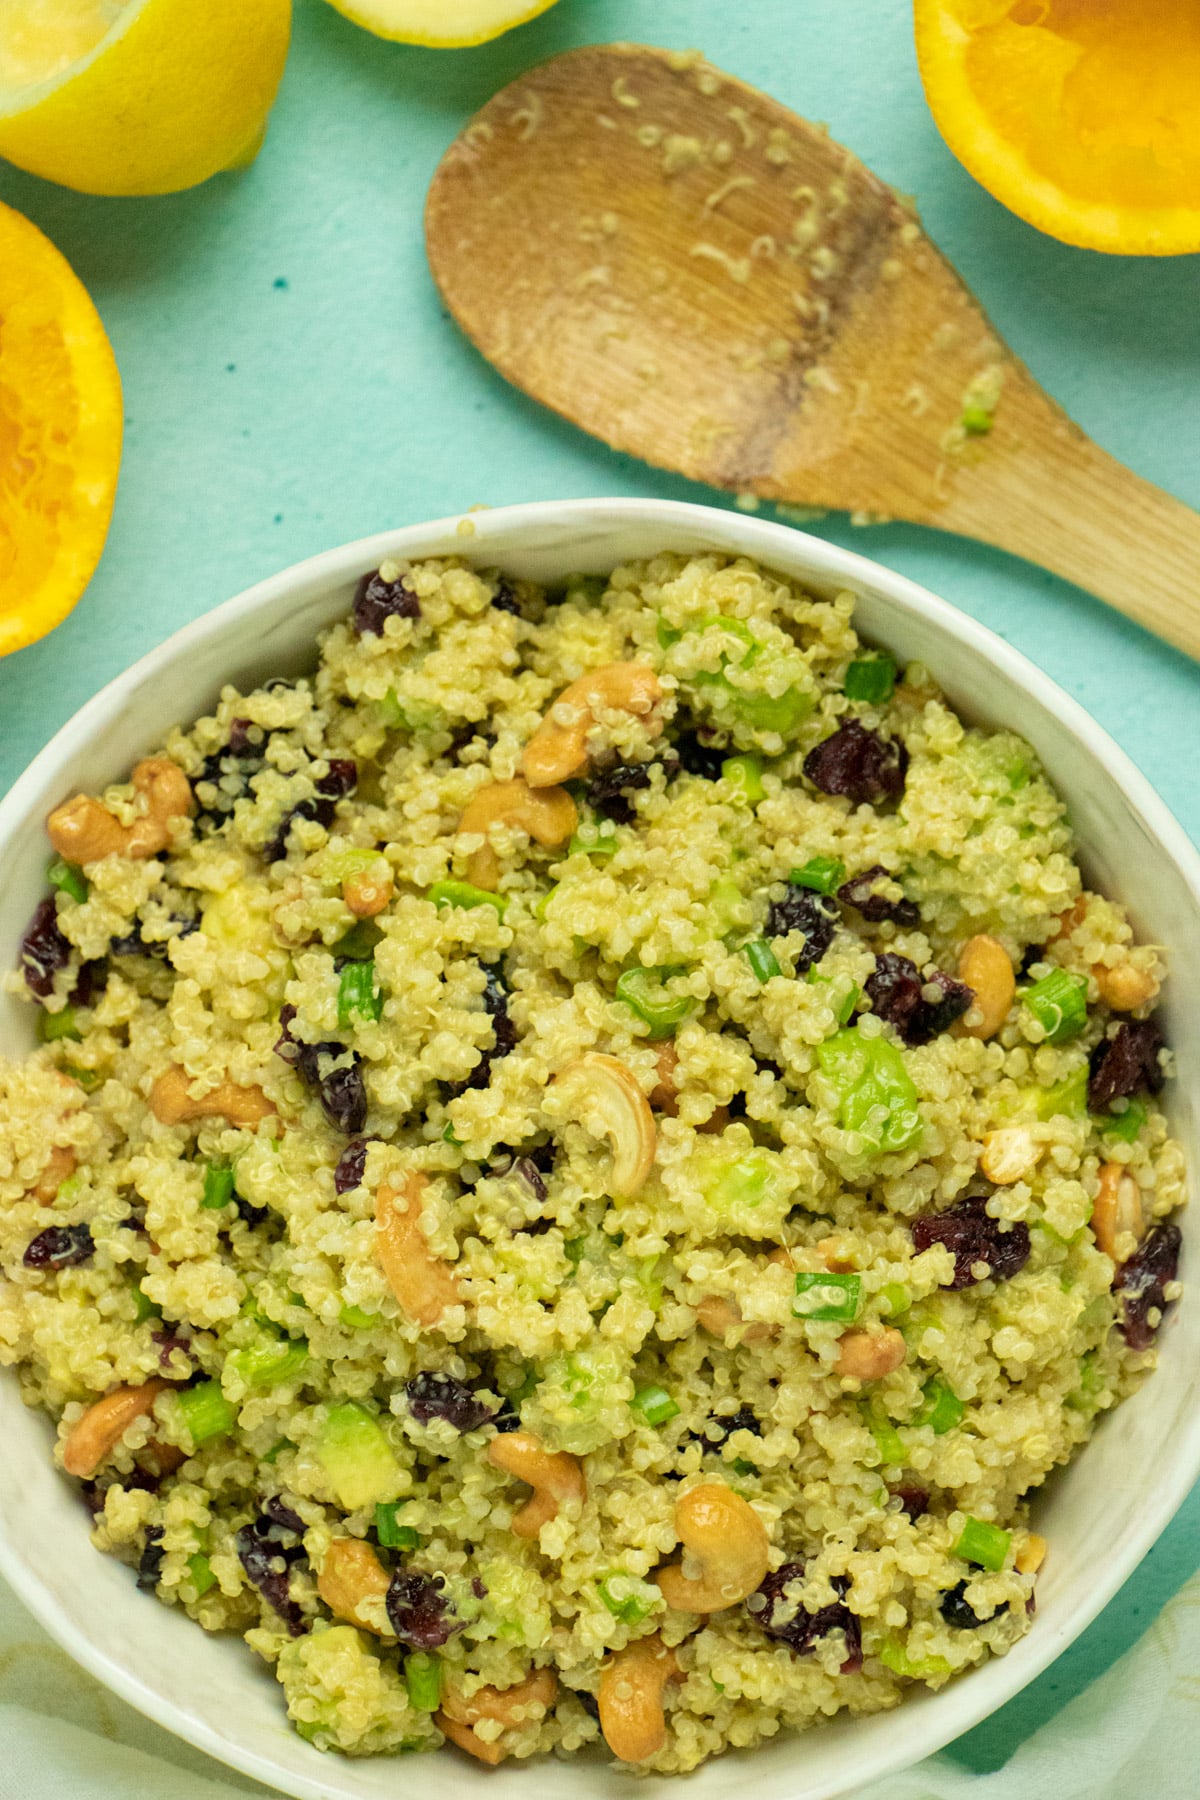 close-up of a serving bowl of quinoa salad with cranberries, avocado, green onion, and cashews